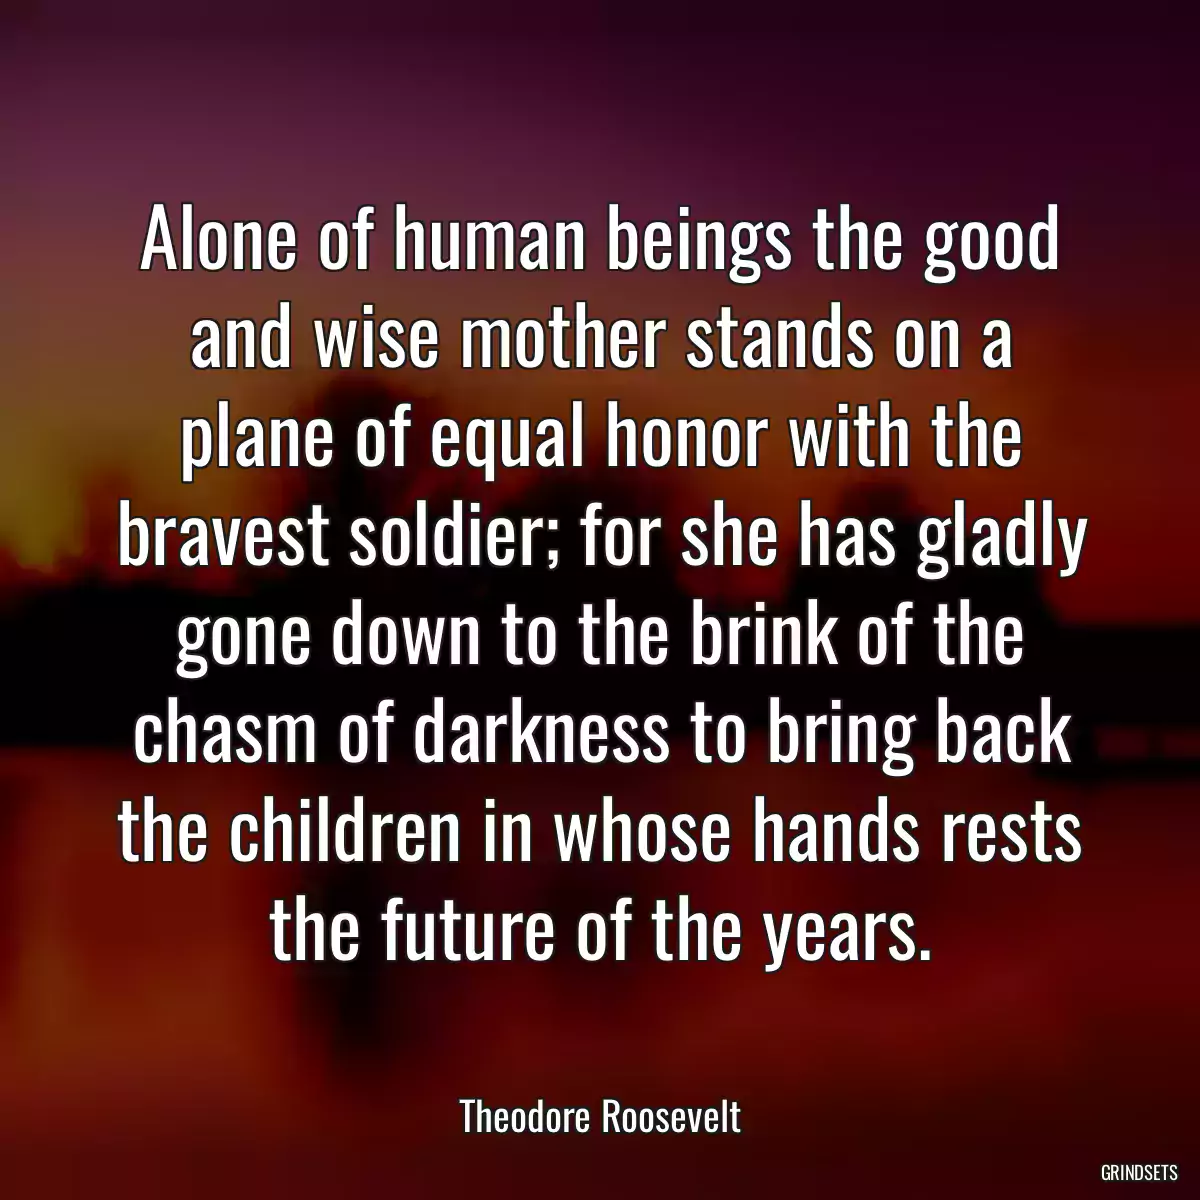 Alone of human beings the good and wise mother stands on a plane of equal honor with the bravest soldier; for she has gladly gone down to the brink of the chasm of darkness to bring back the children in whose hands rests the future of the years.